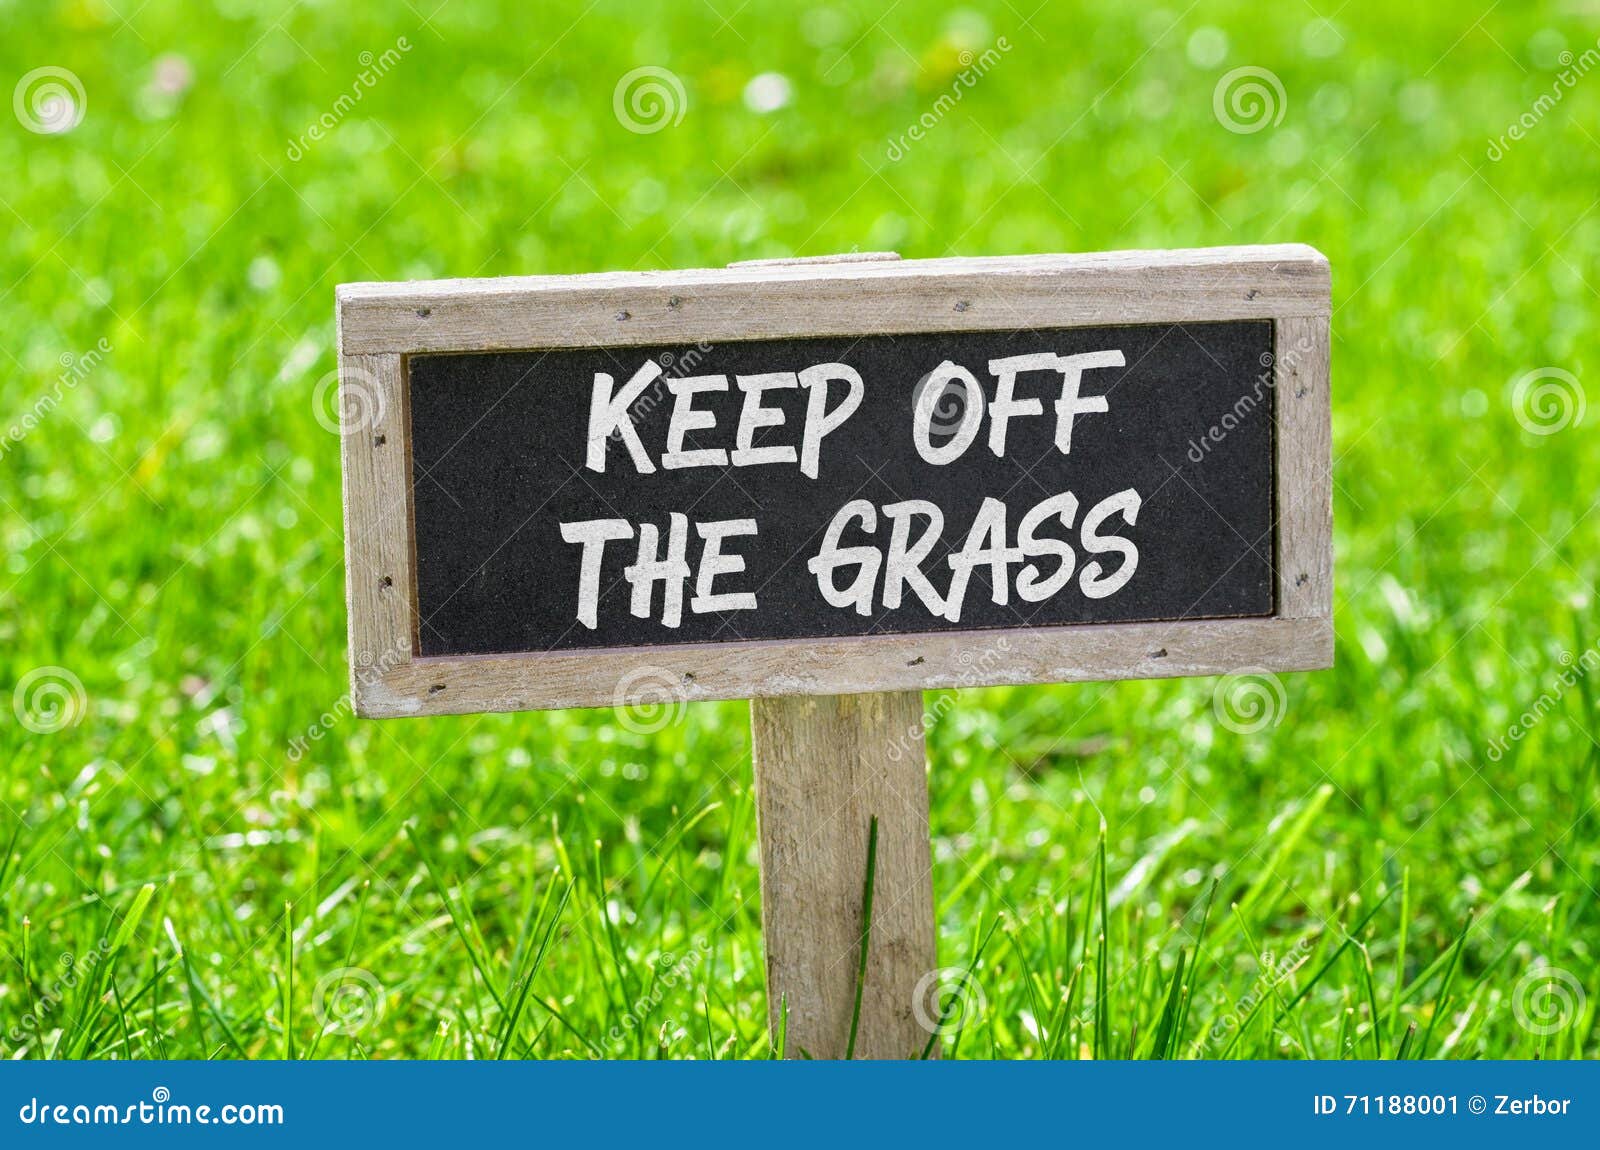 Keep off the grass stock image. Image of restriction - 71188001